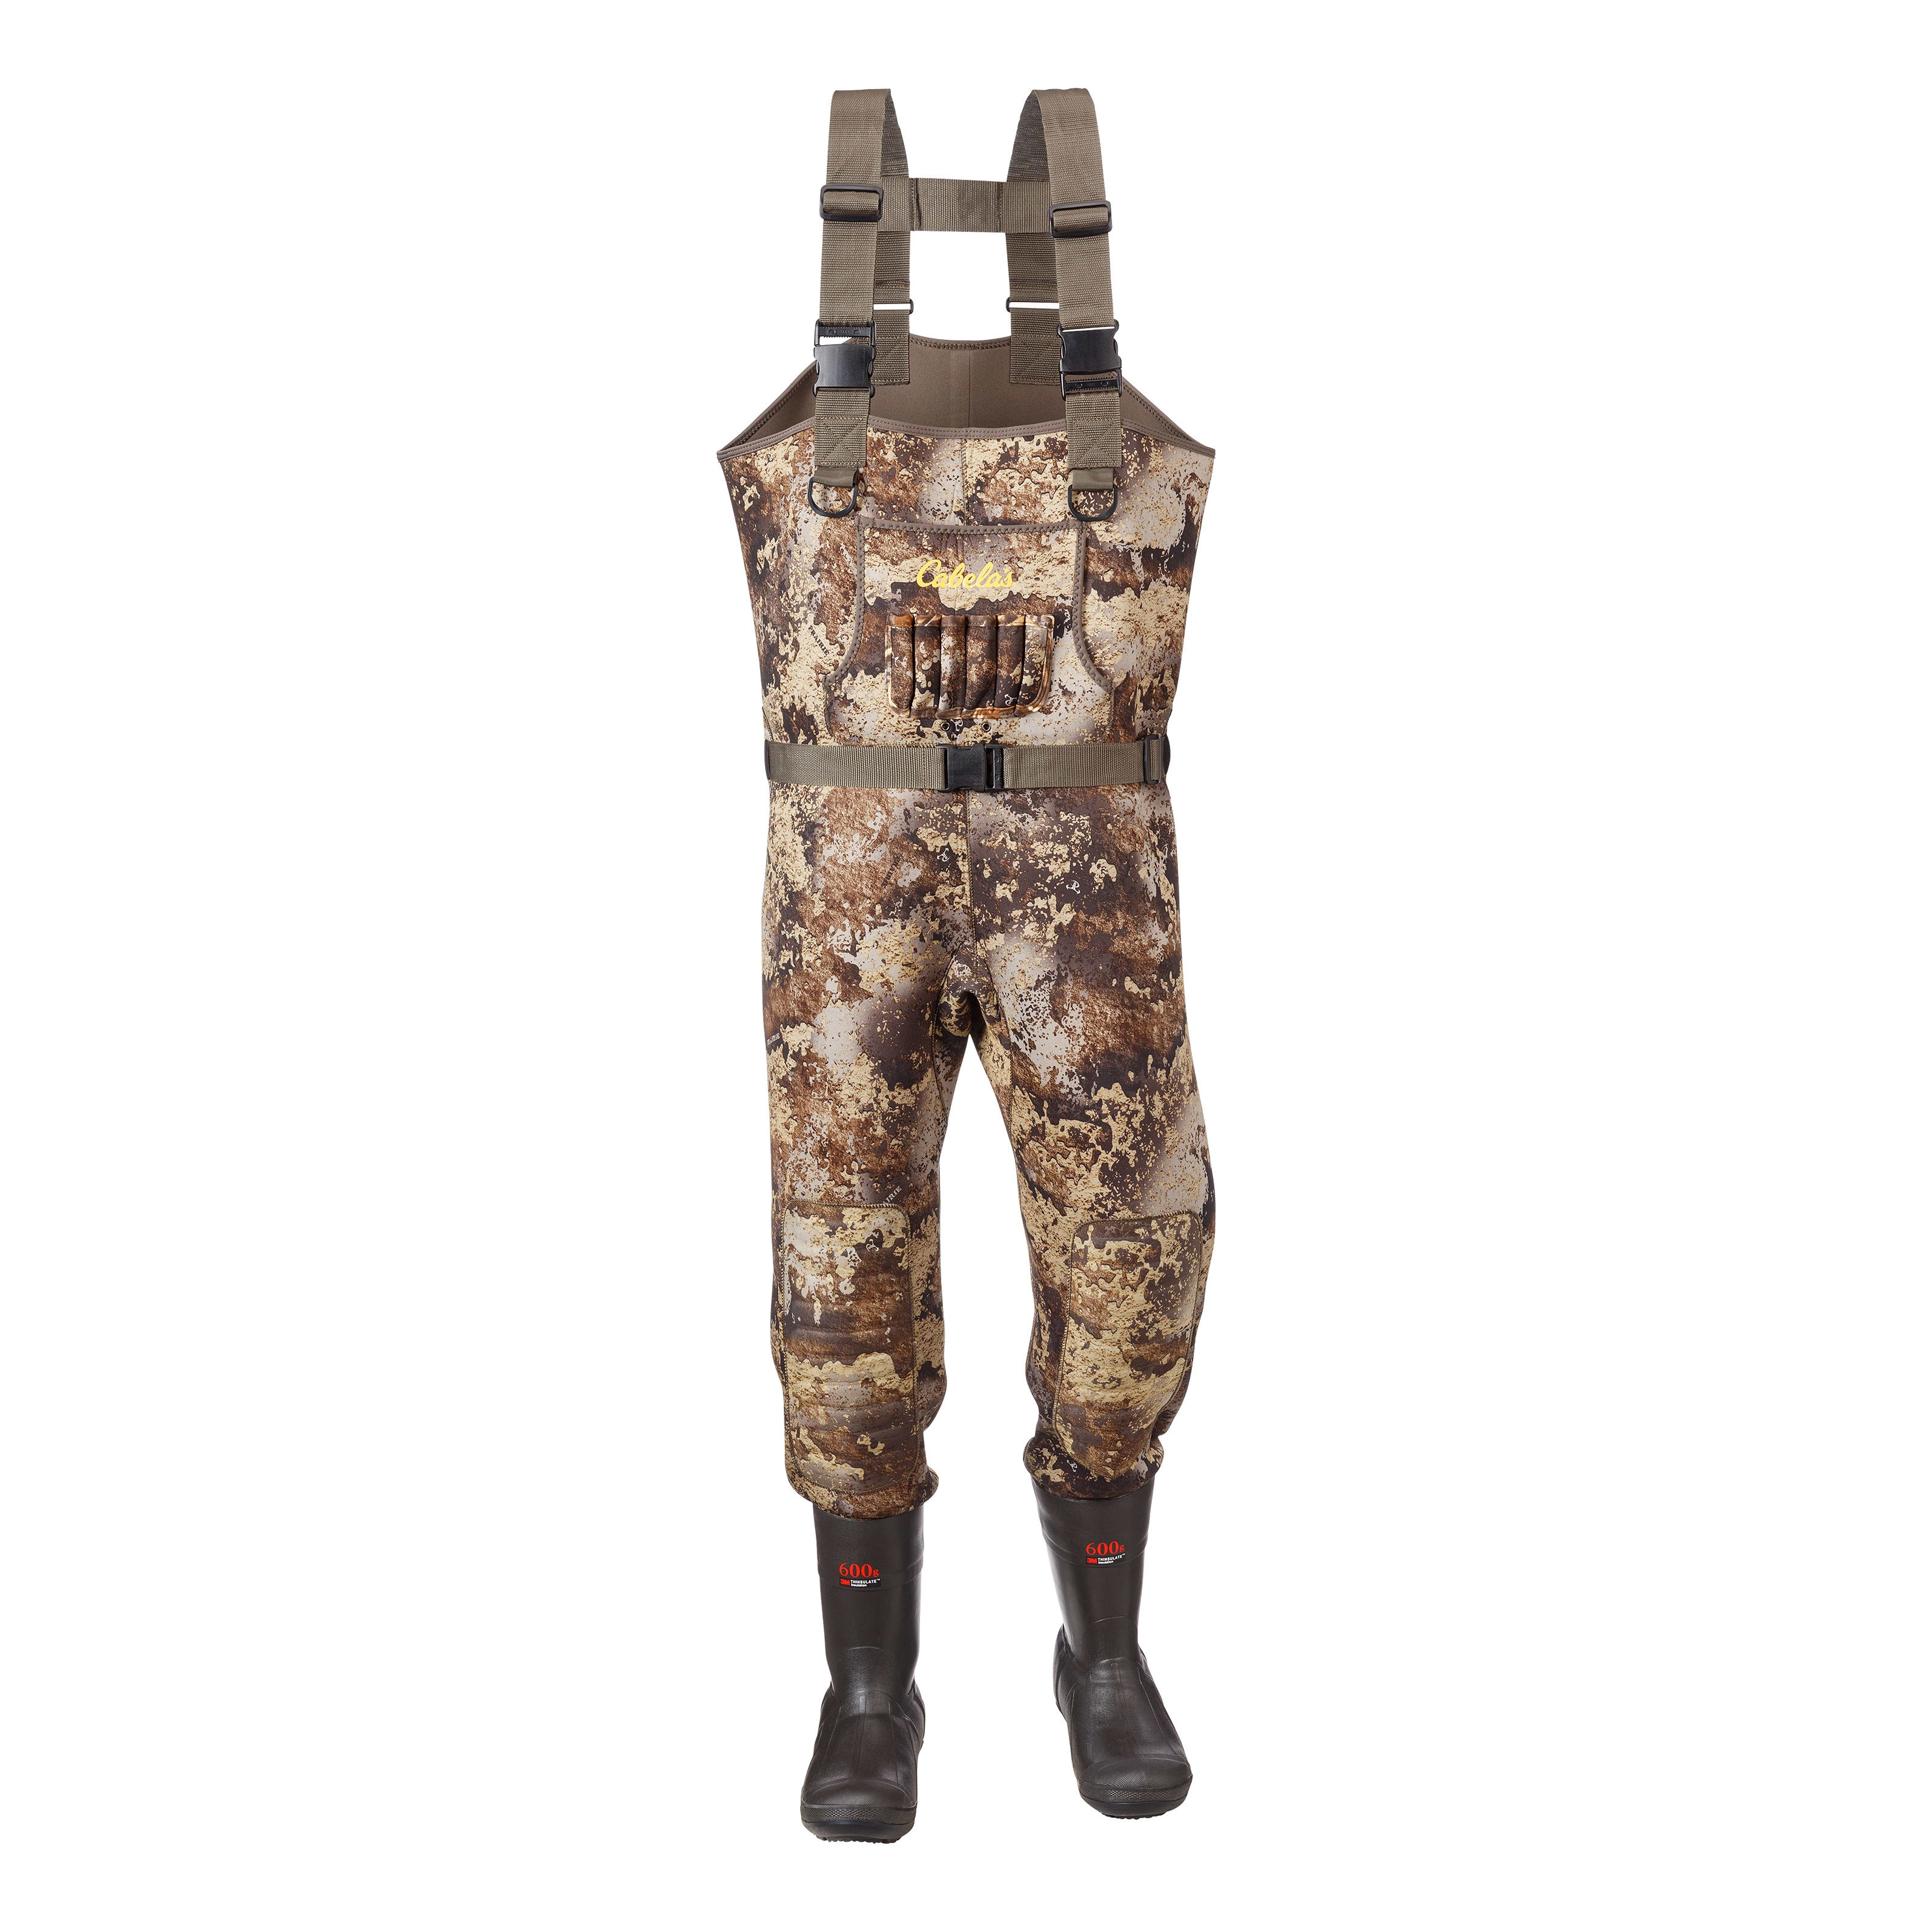 Cabela's Men's Breathable Hunting Waders with 4MOST DRY-PLUS™ and